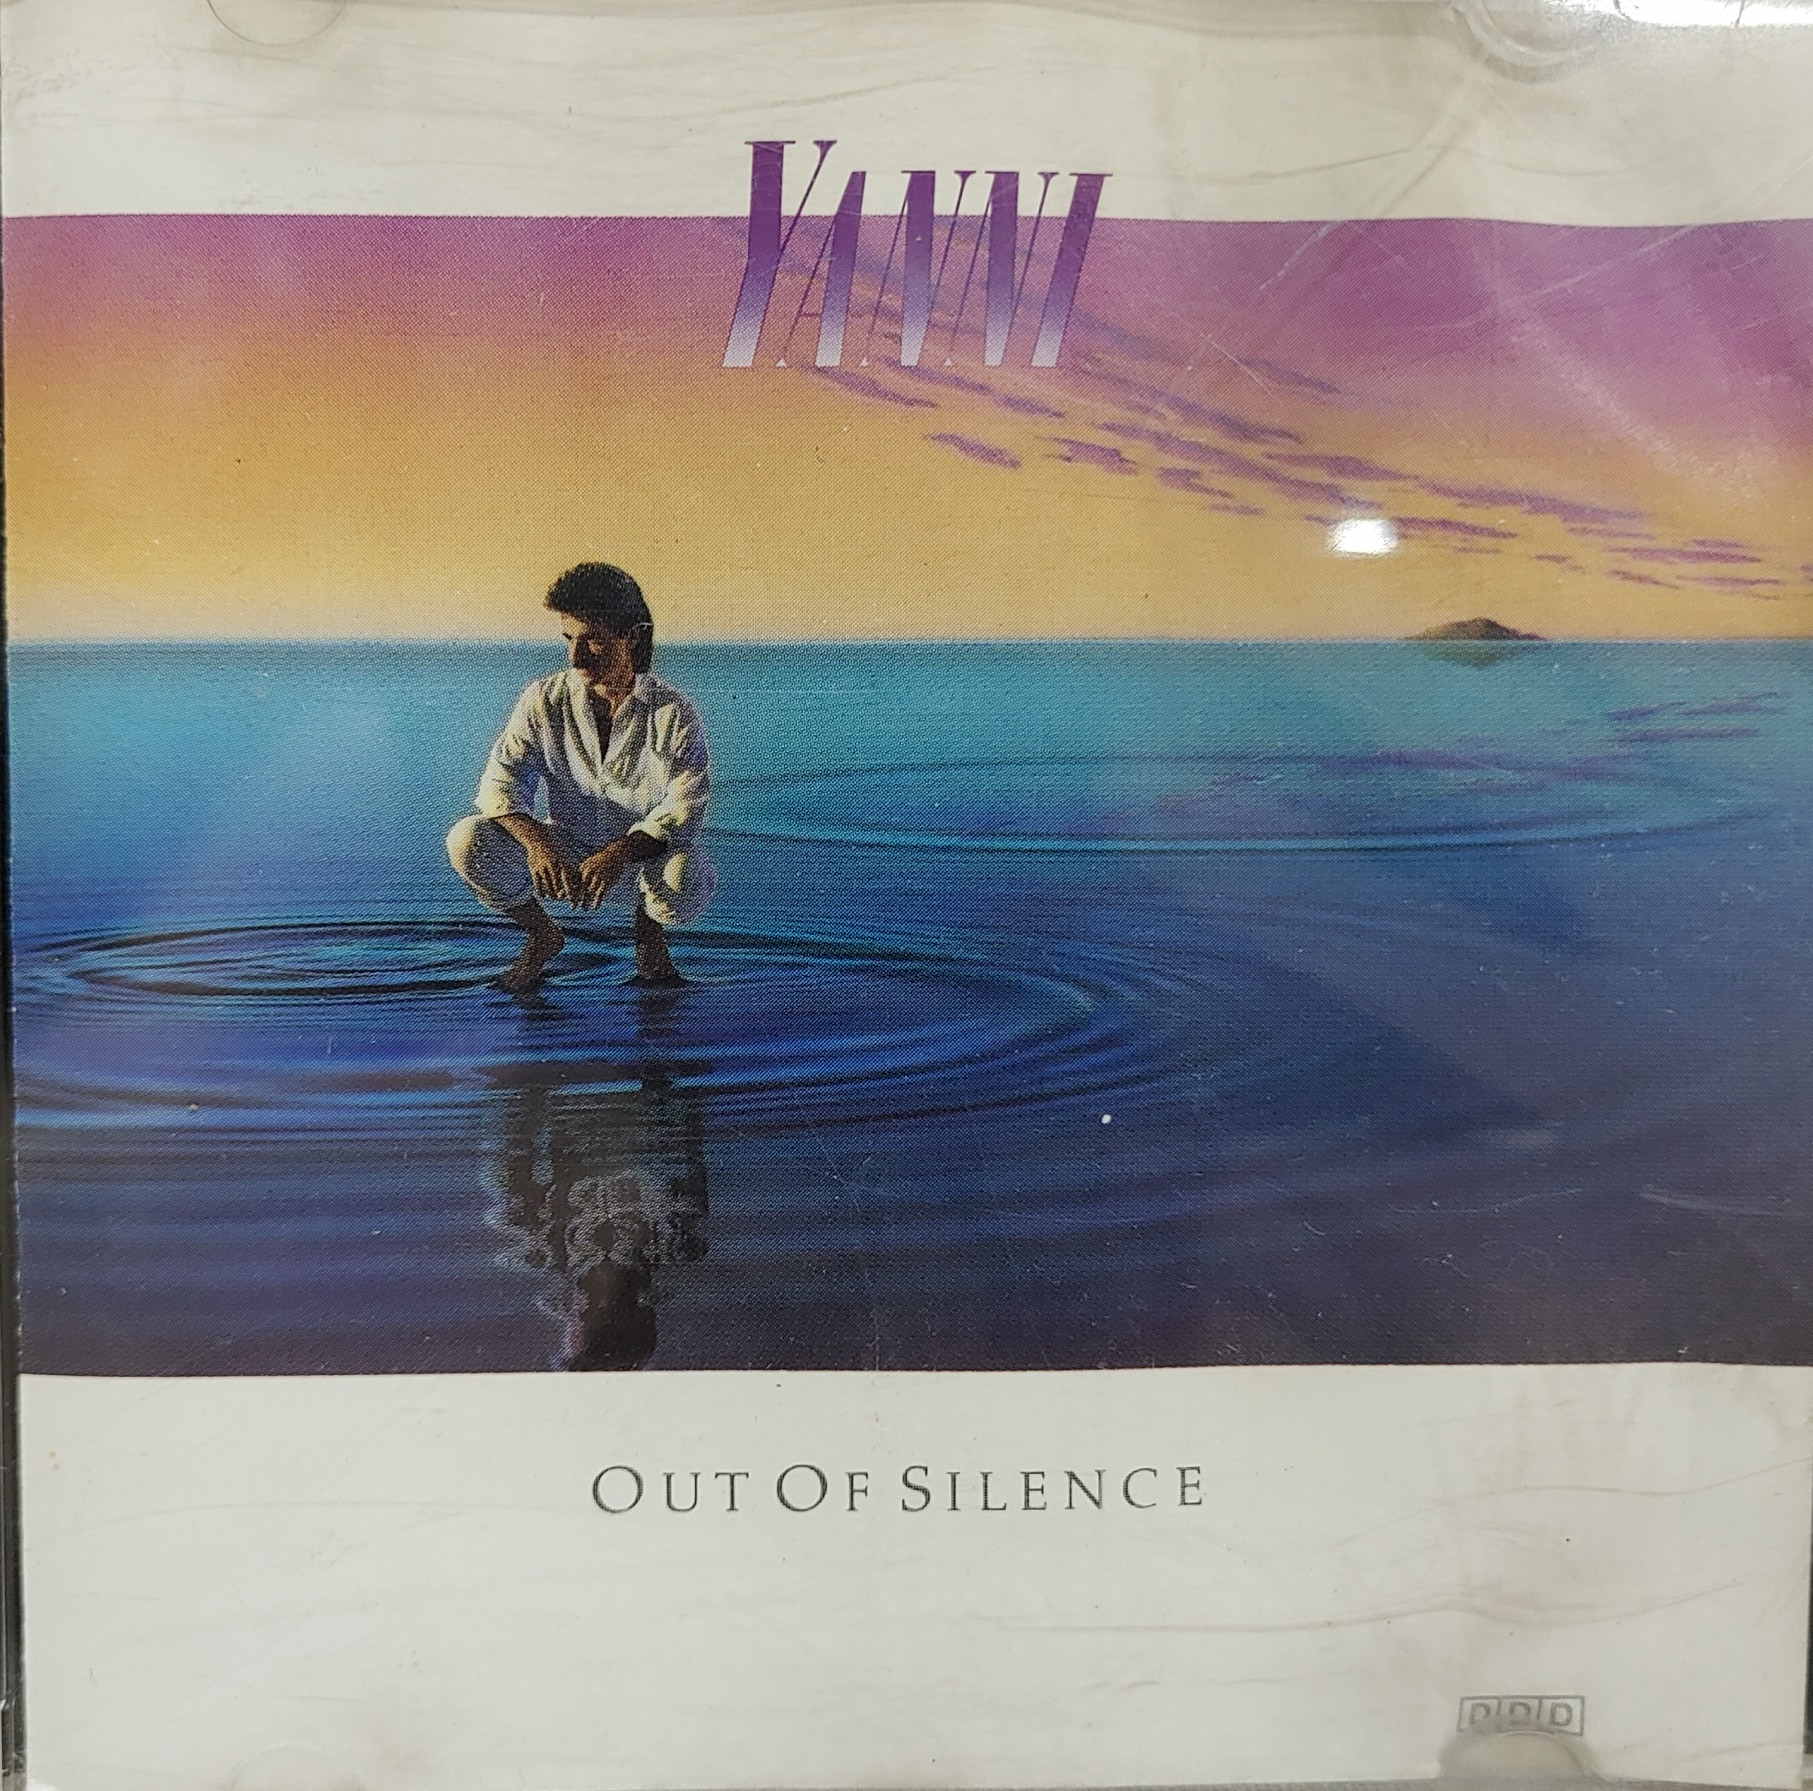 Yanni / Out of Silence